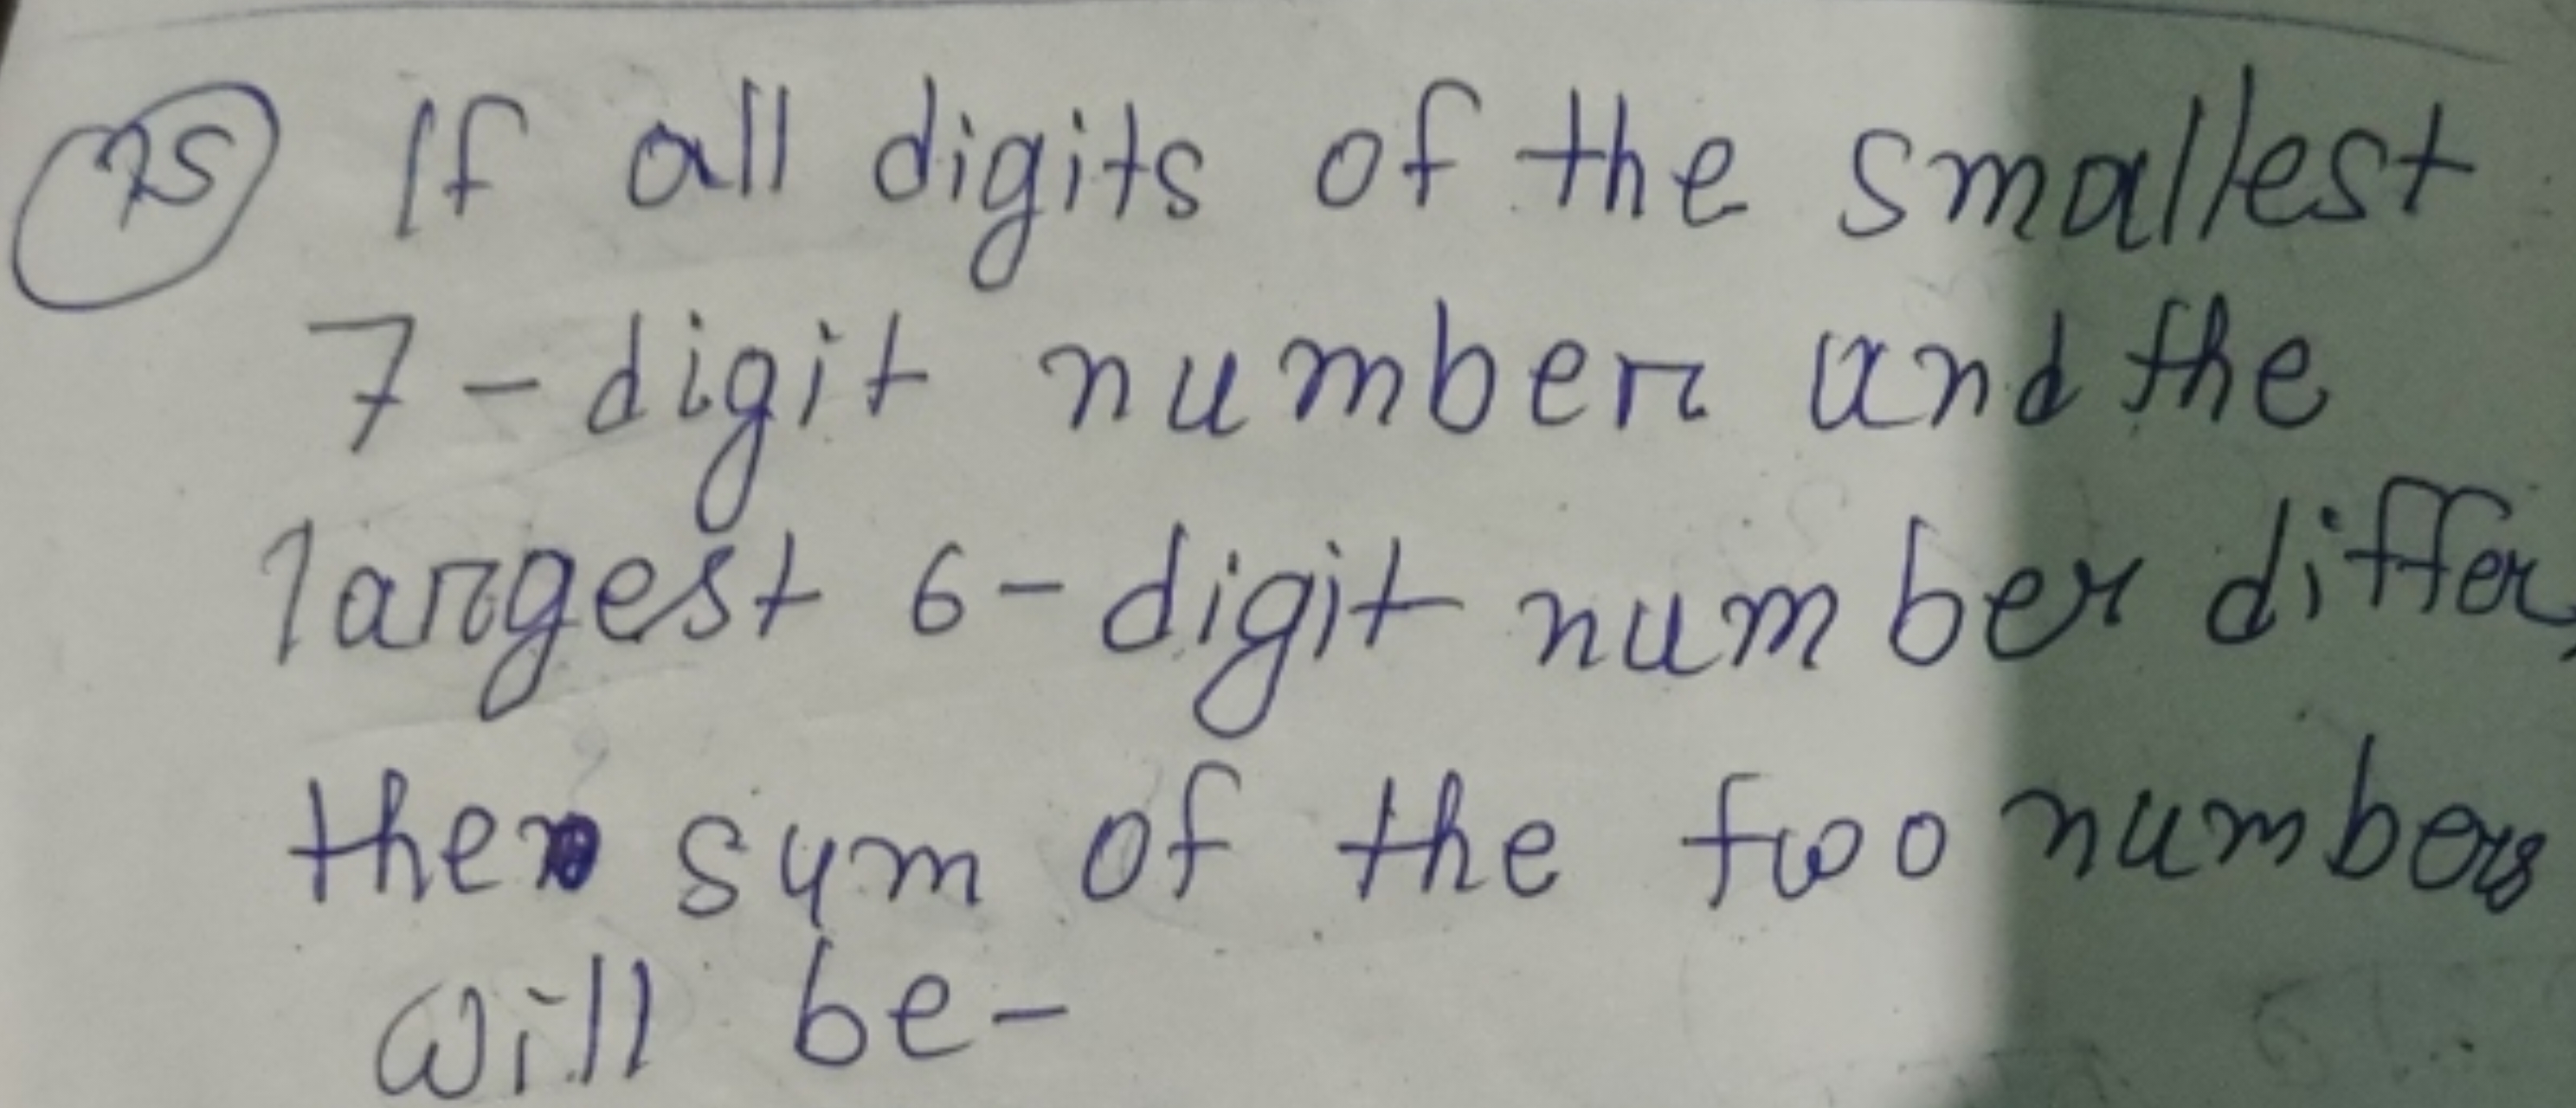 (20) If all digits of the smallest 7 -digit number und the 1 largest 6